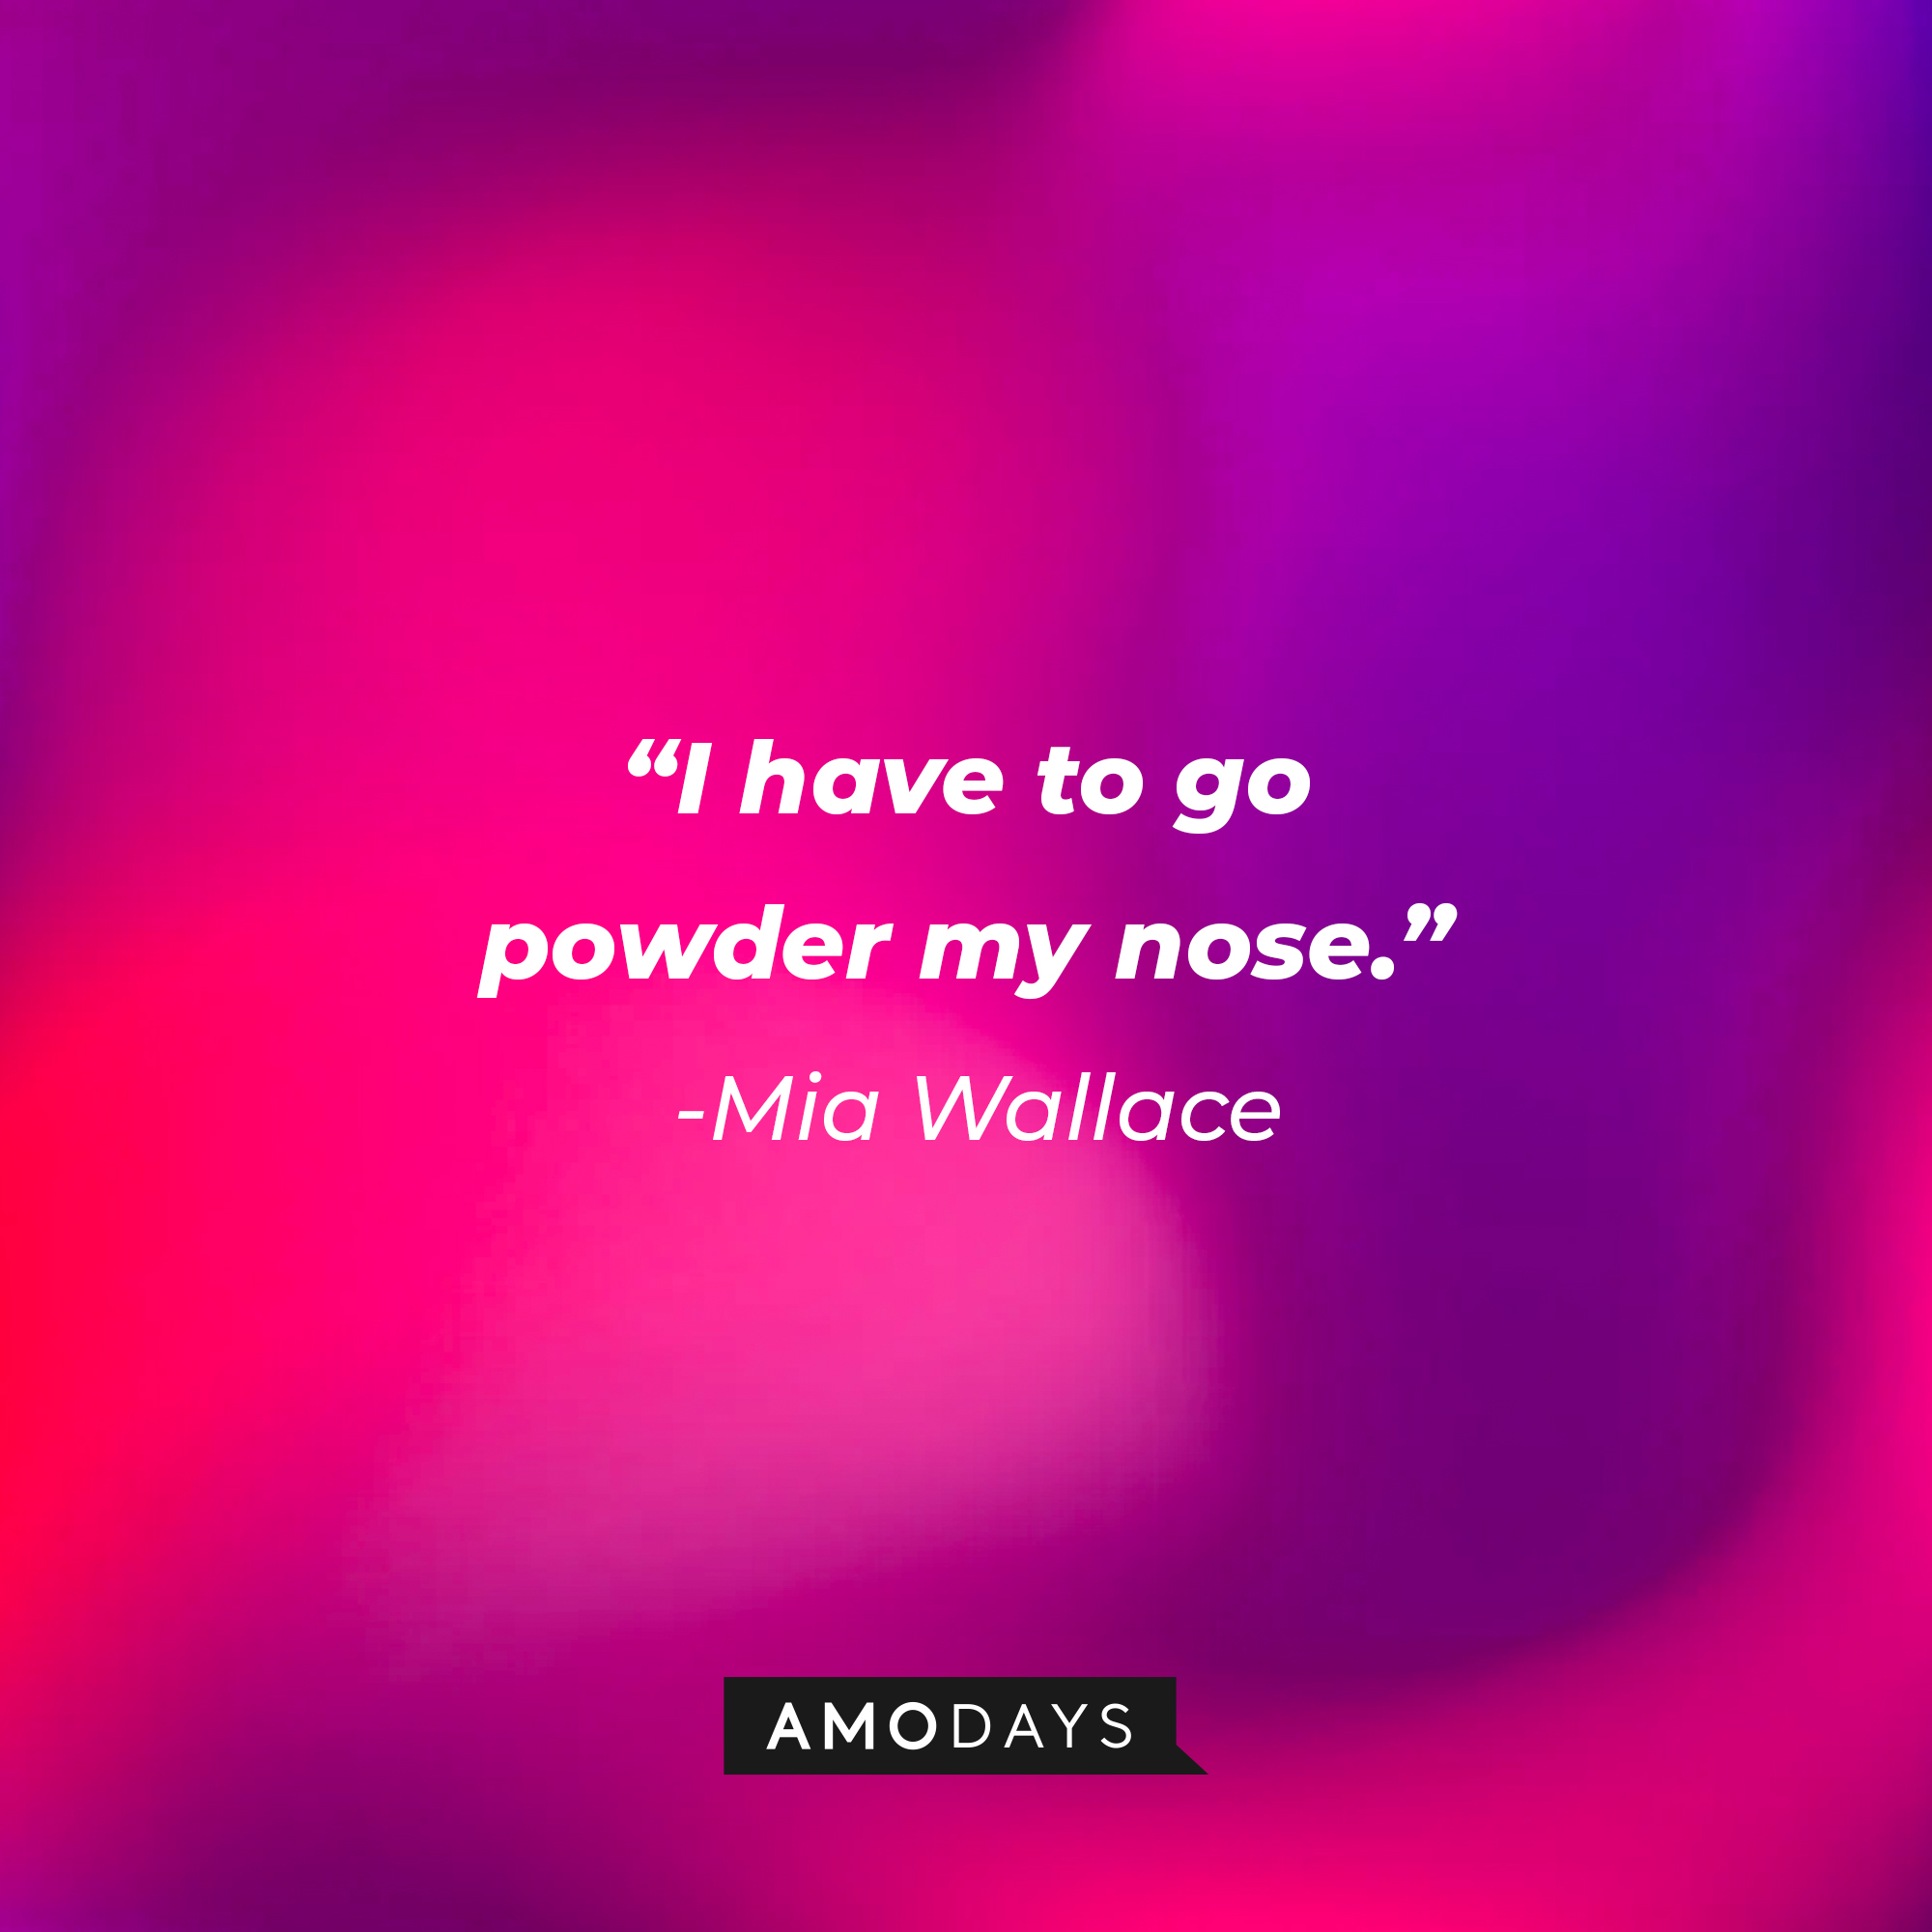 Mia Wallace’s quote: “I have to go powder my nose.” | Source: AmoDays